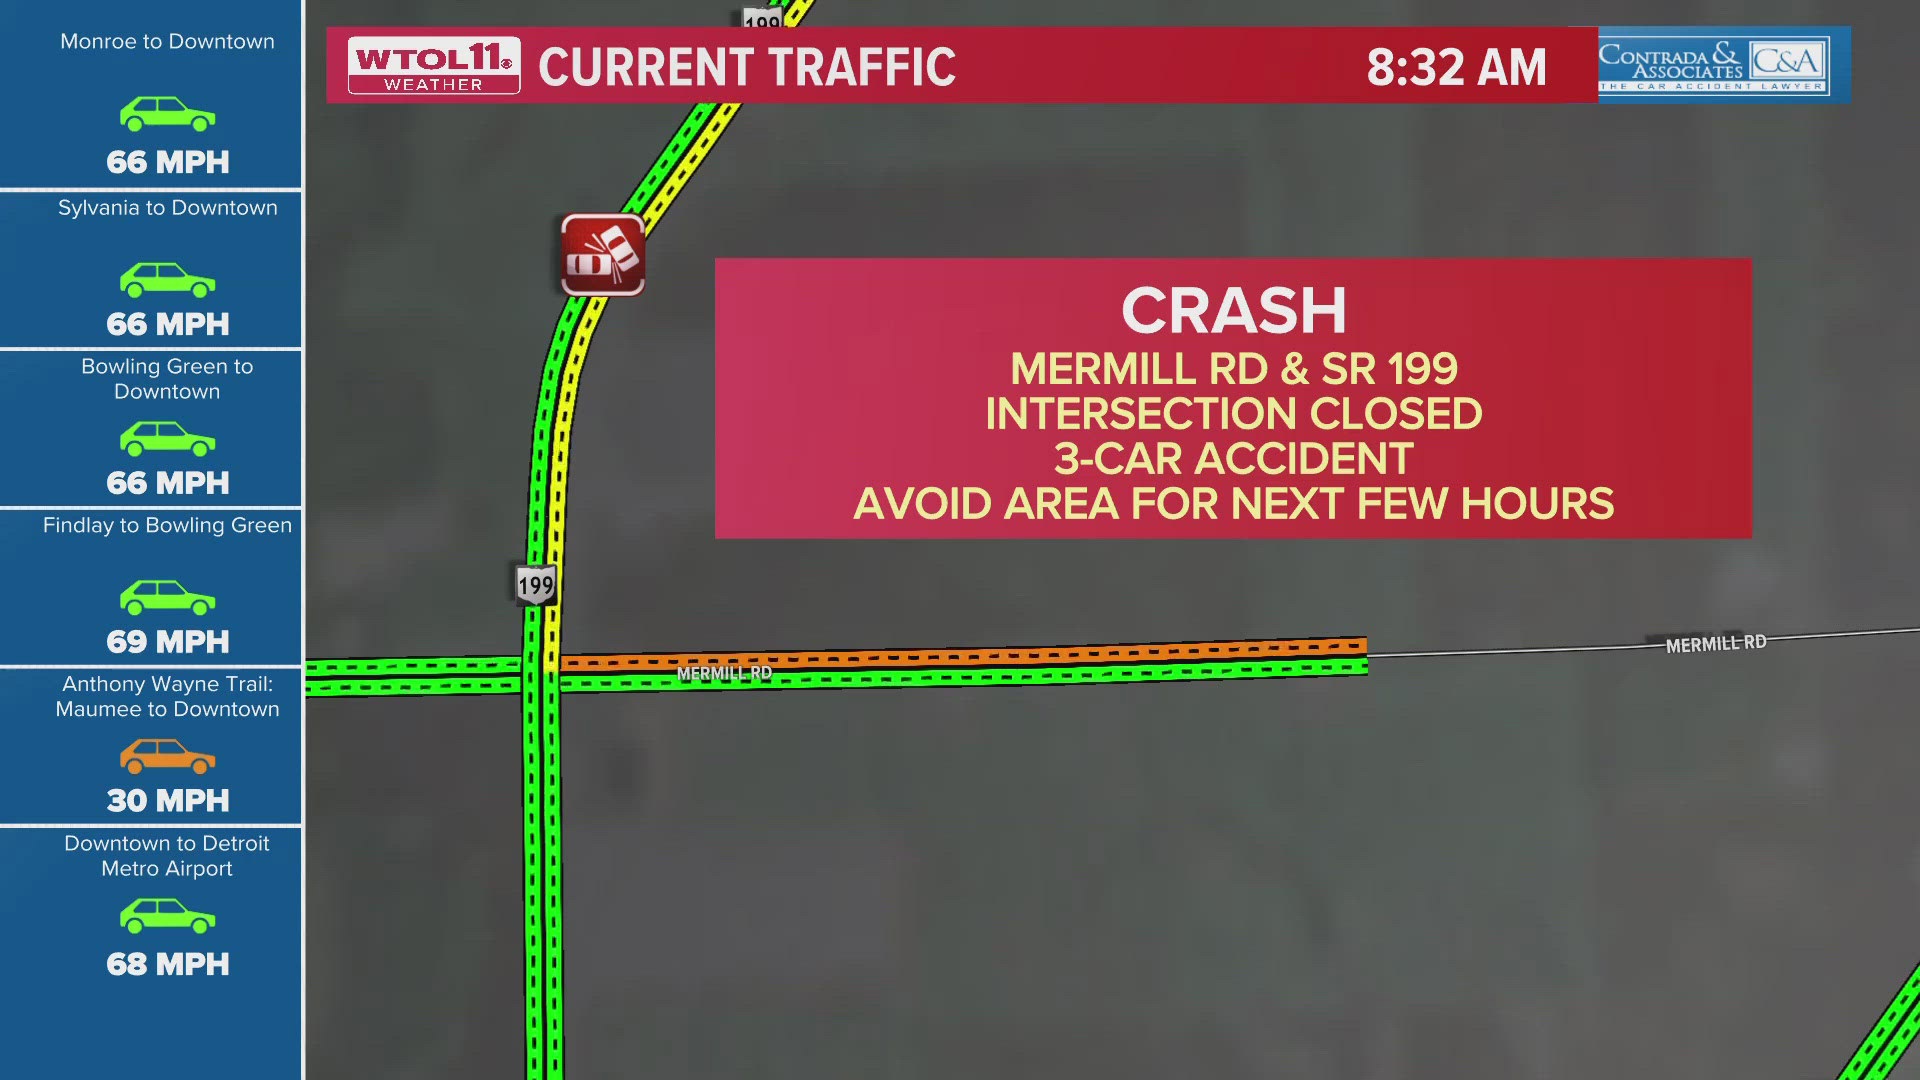 The crash occurred at Mermill Road and SR 199. The intersection is closed.